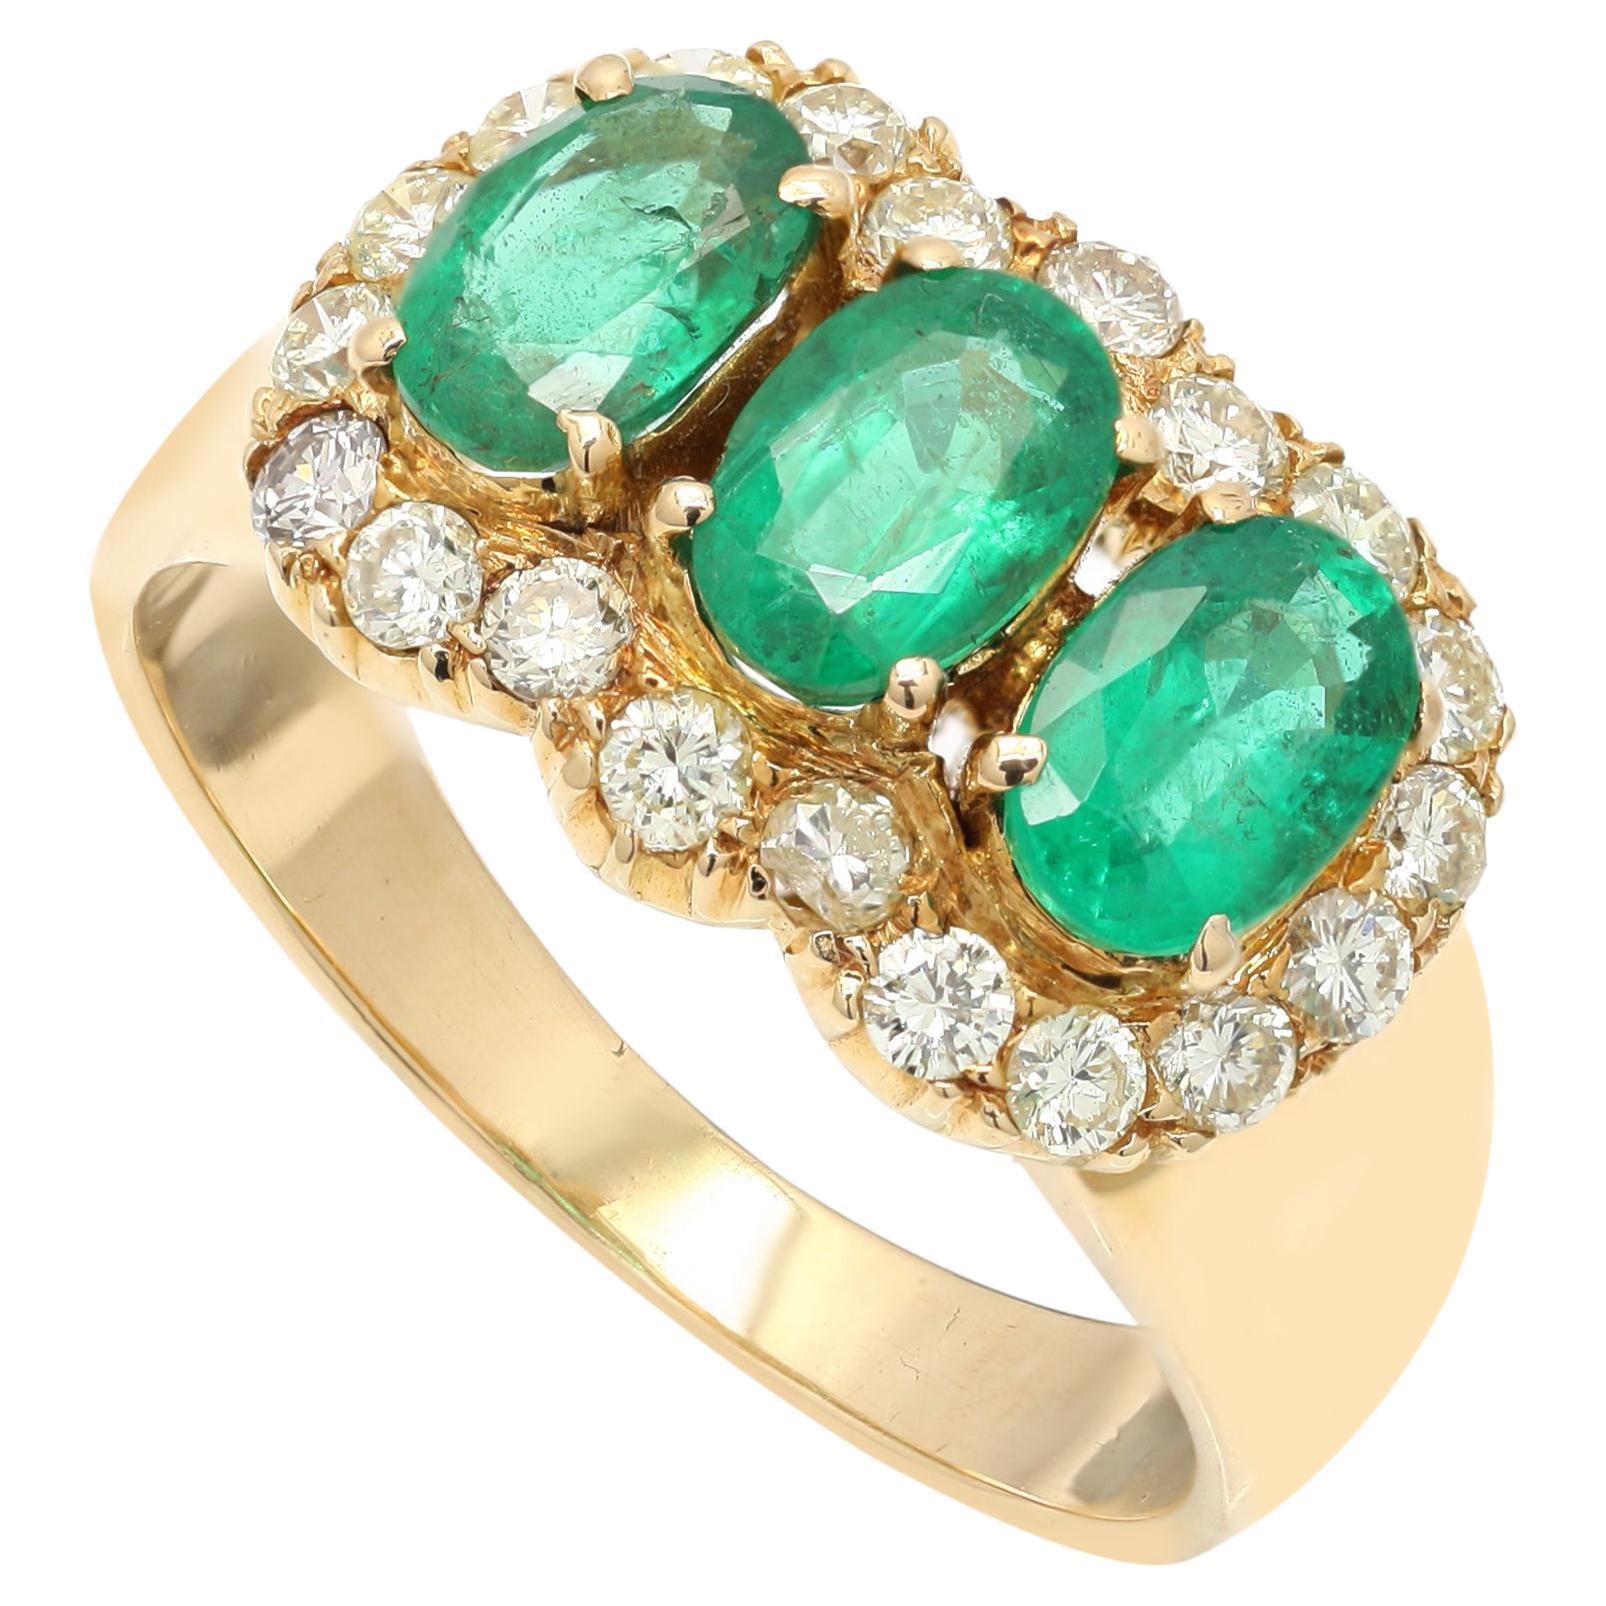 For Sale:  Estate 2.1 ct Oval Emerald Ring with Diamonds Encircling in 18 Karat Yellow Gold